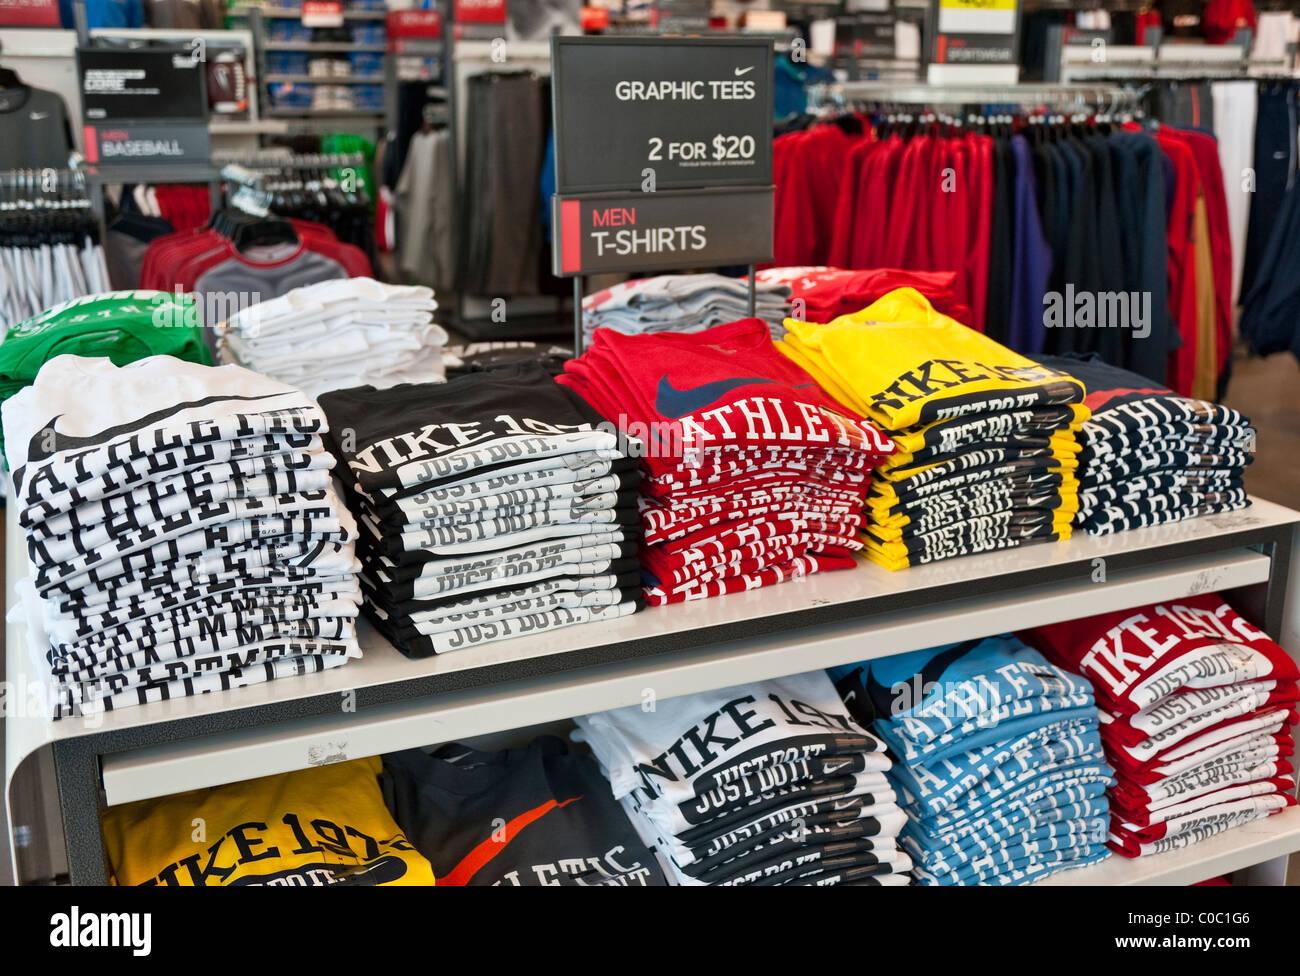 Nike branded merchandise at an outlet store. Stock Photo